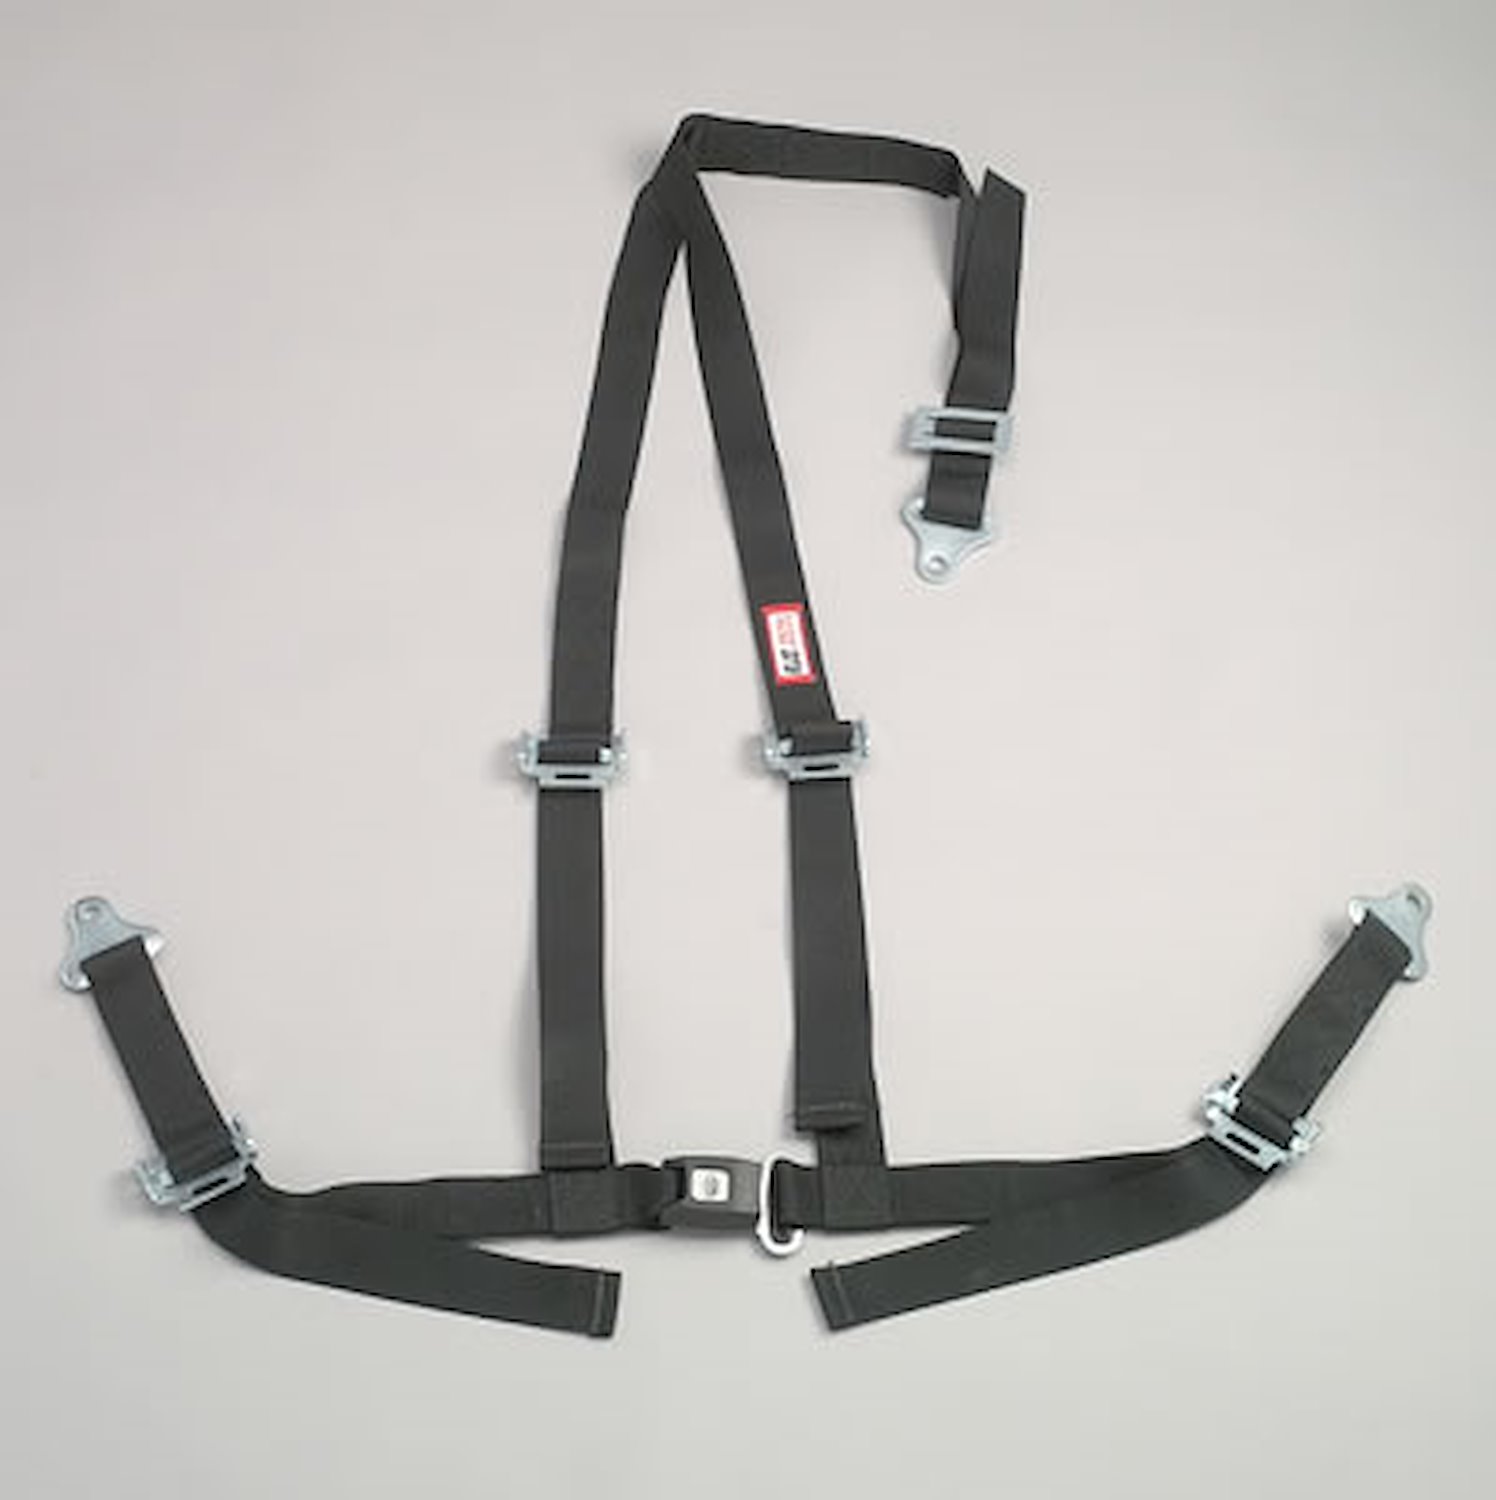 NON-SFI B&T HARNESS 2 PULL DOWN Lap Belt SNAP 2 S.H. INDIVIDUAL FLOOR Mount WRAP/BOLT GRAY